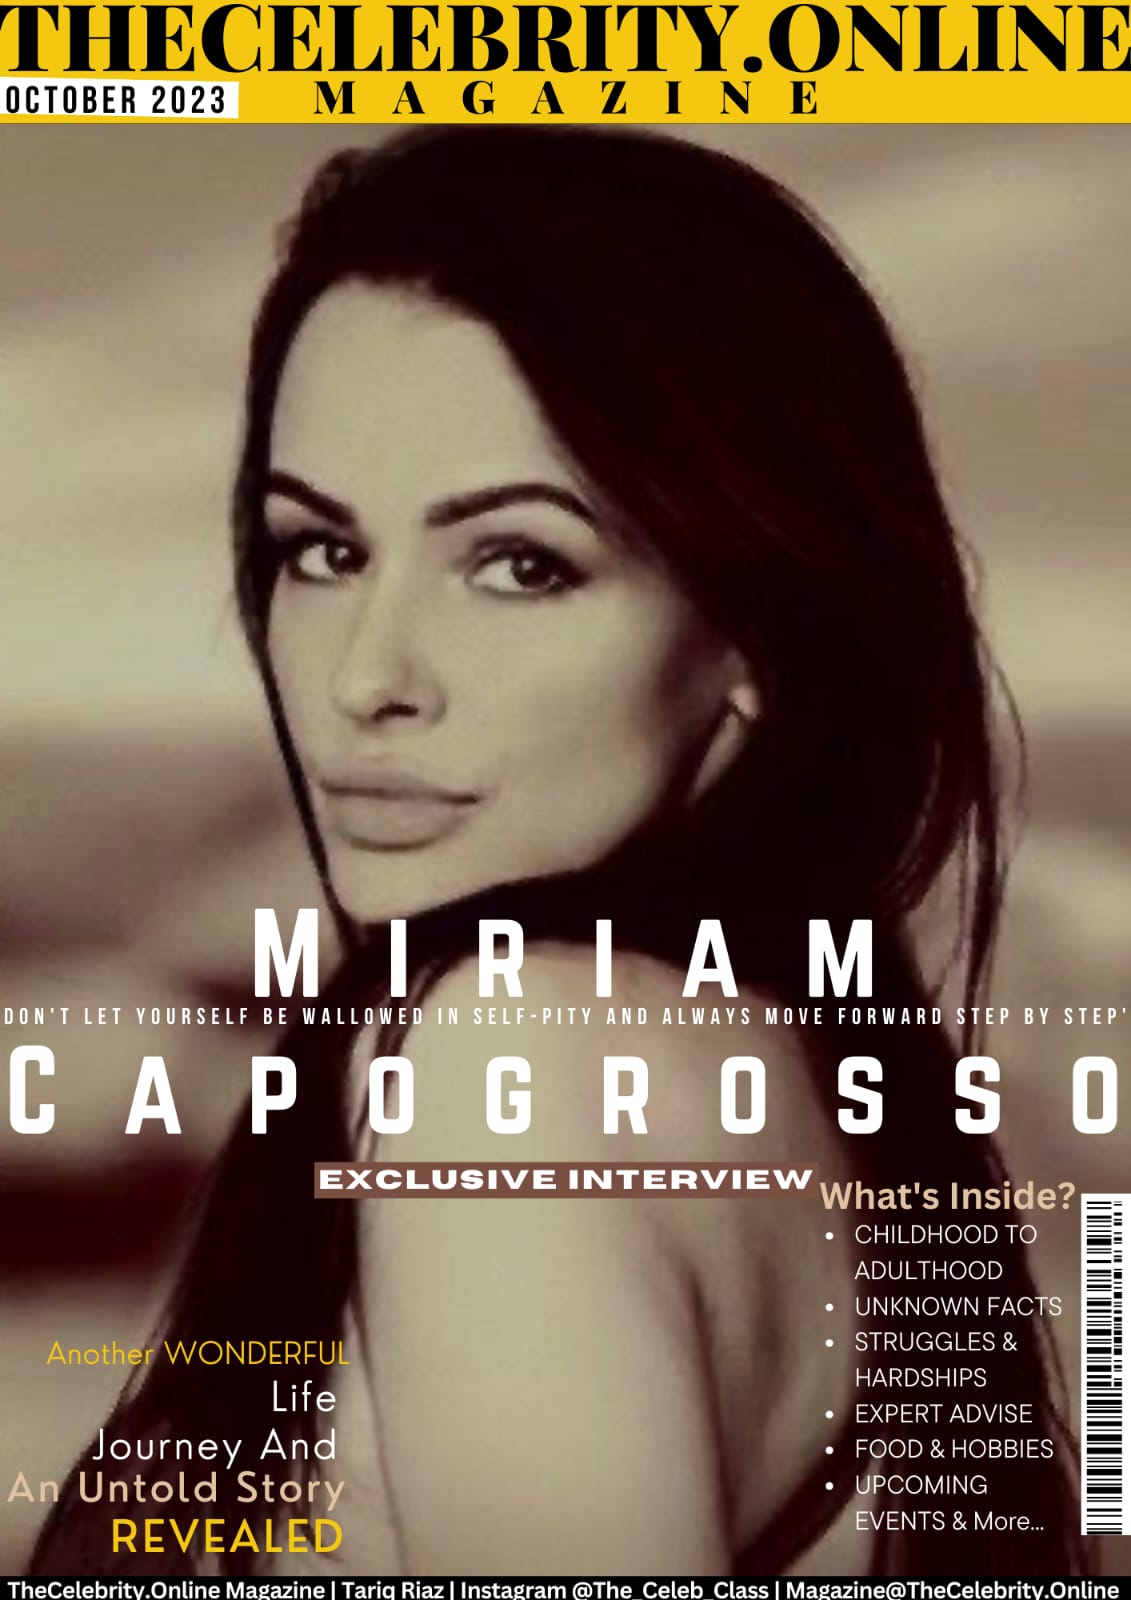 Miriam Capogrosso Exclusive Interview – ‘Don’t let yourself be wallowed in self-pity and always move forward step by step’